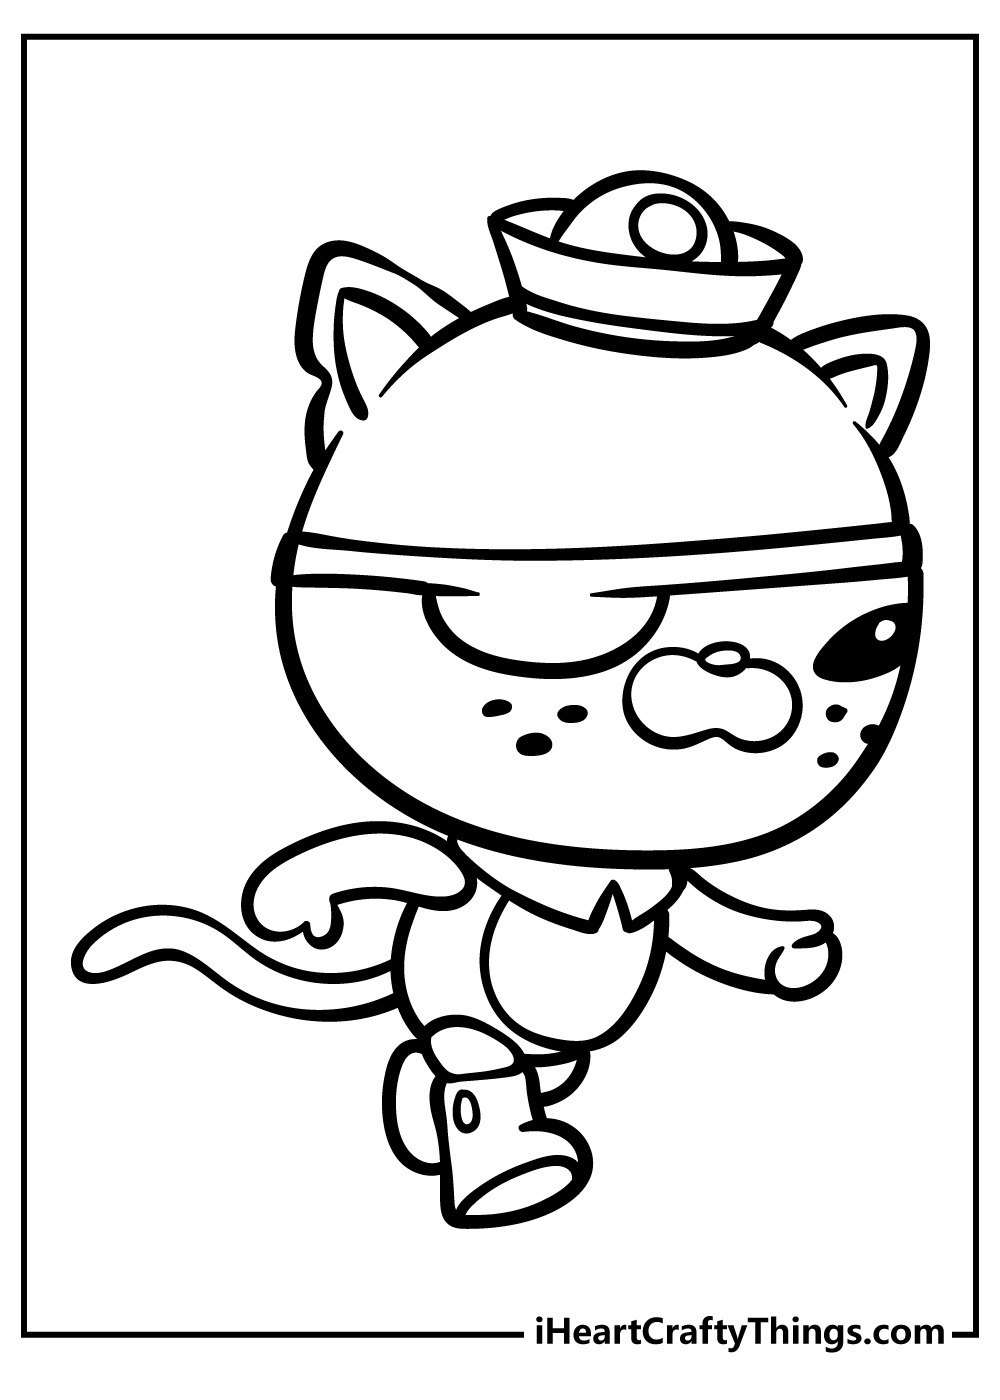 Octonauts Coloring Pages for kids free download